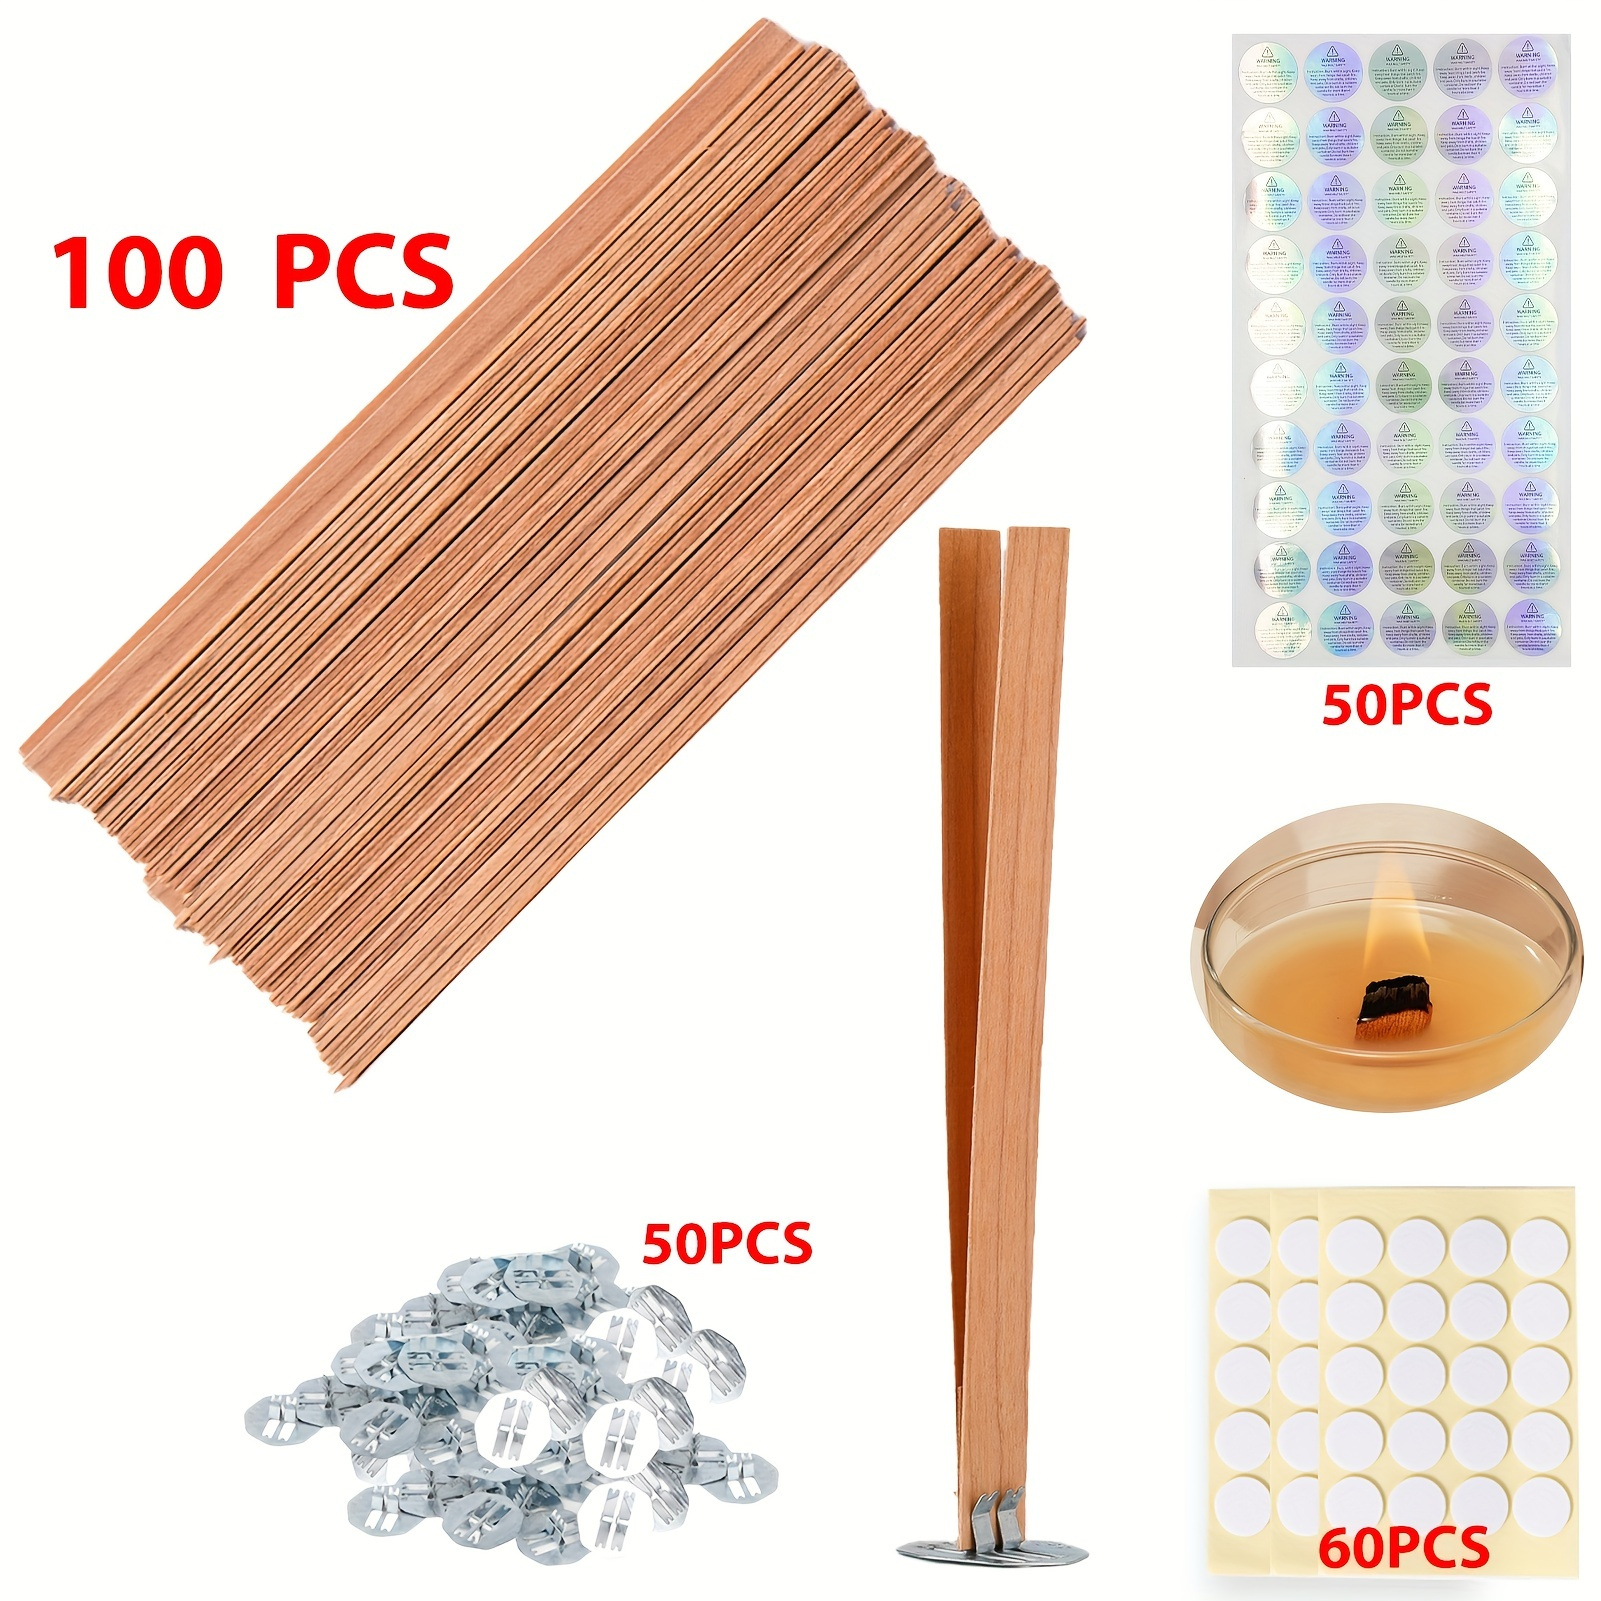 100 Pcs Wood Candle Wick Base Clips for Candle Making, Wood Wick